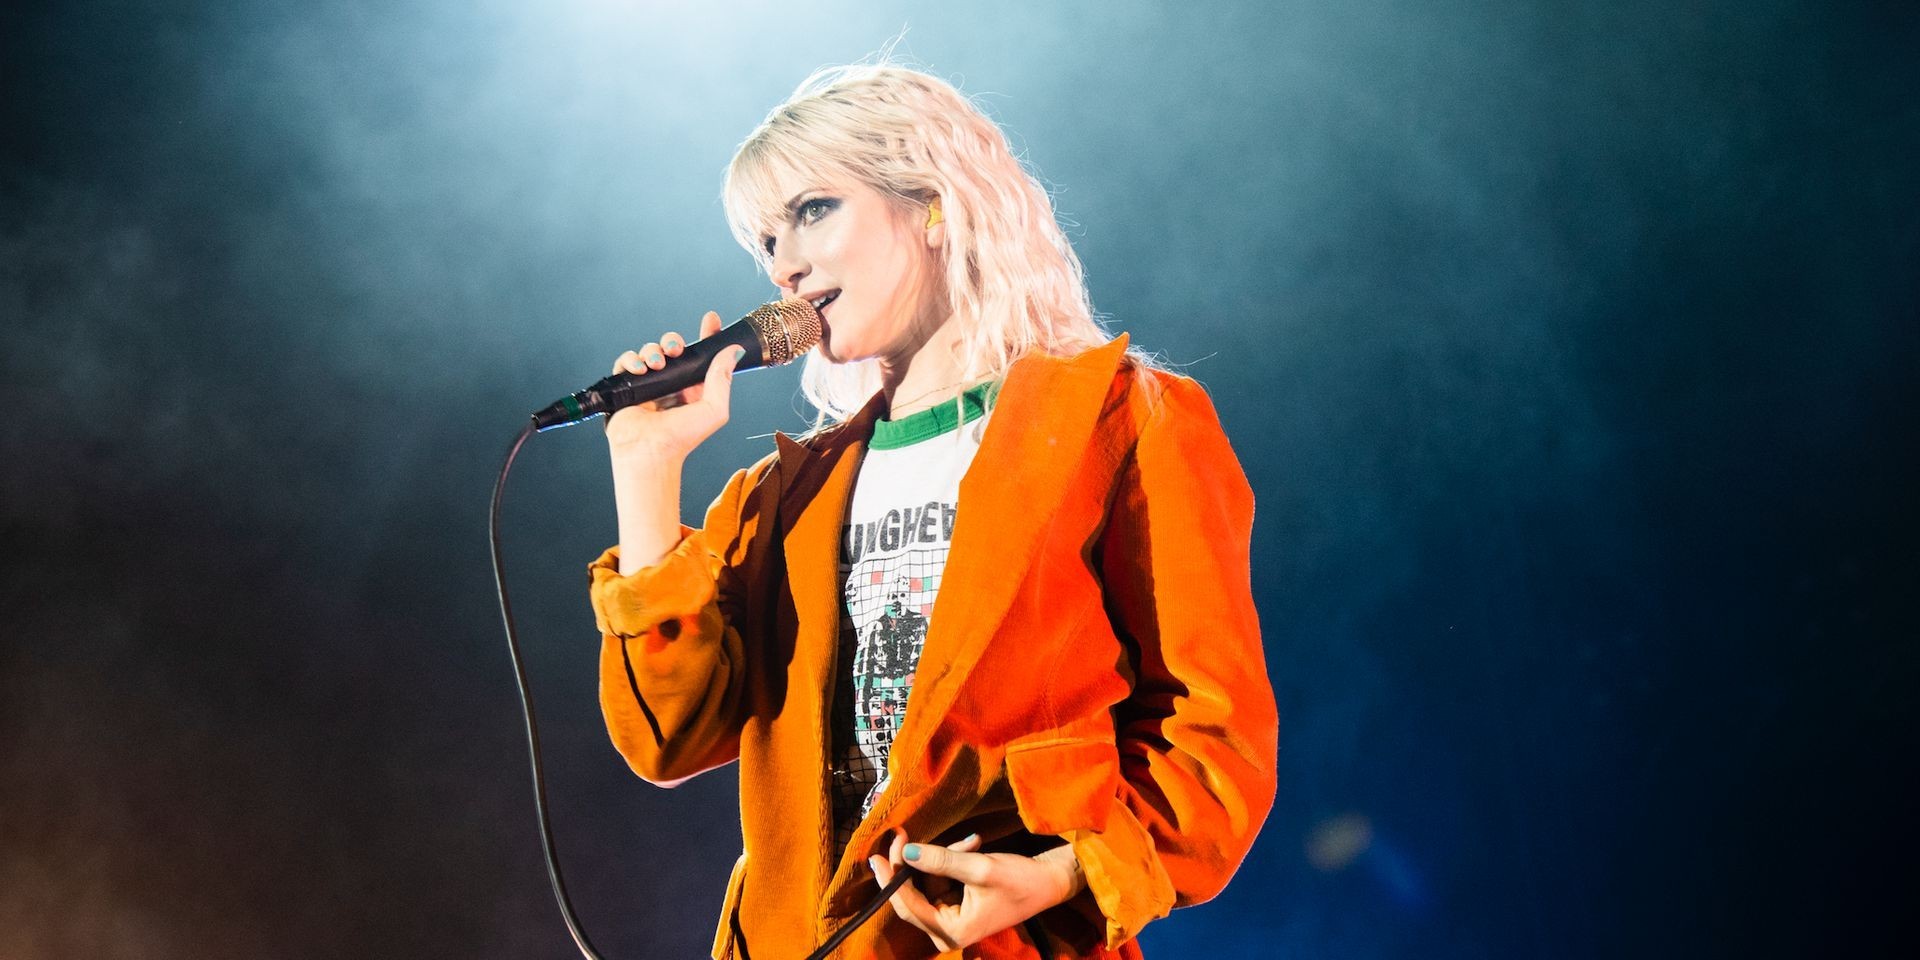 Paramore showcase maturity and diversity in Singapore - gig report 